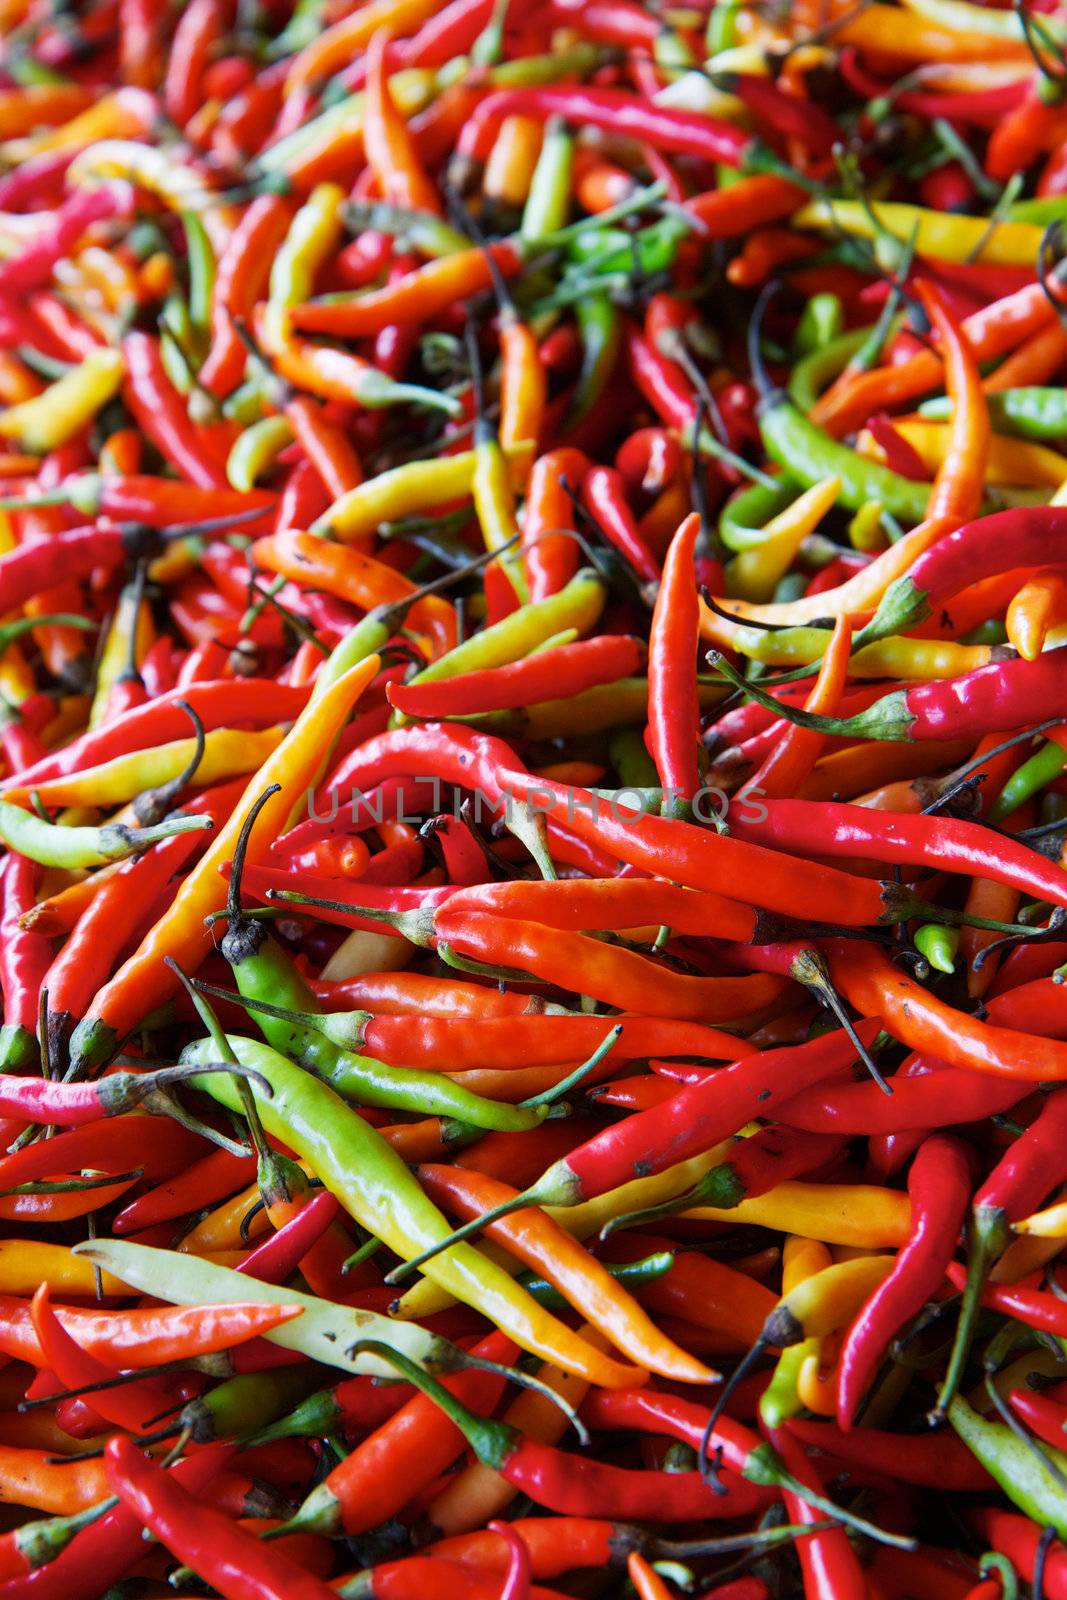 Pile of Hot red, yellow, and green peppers at farmers market